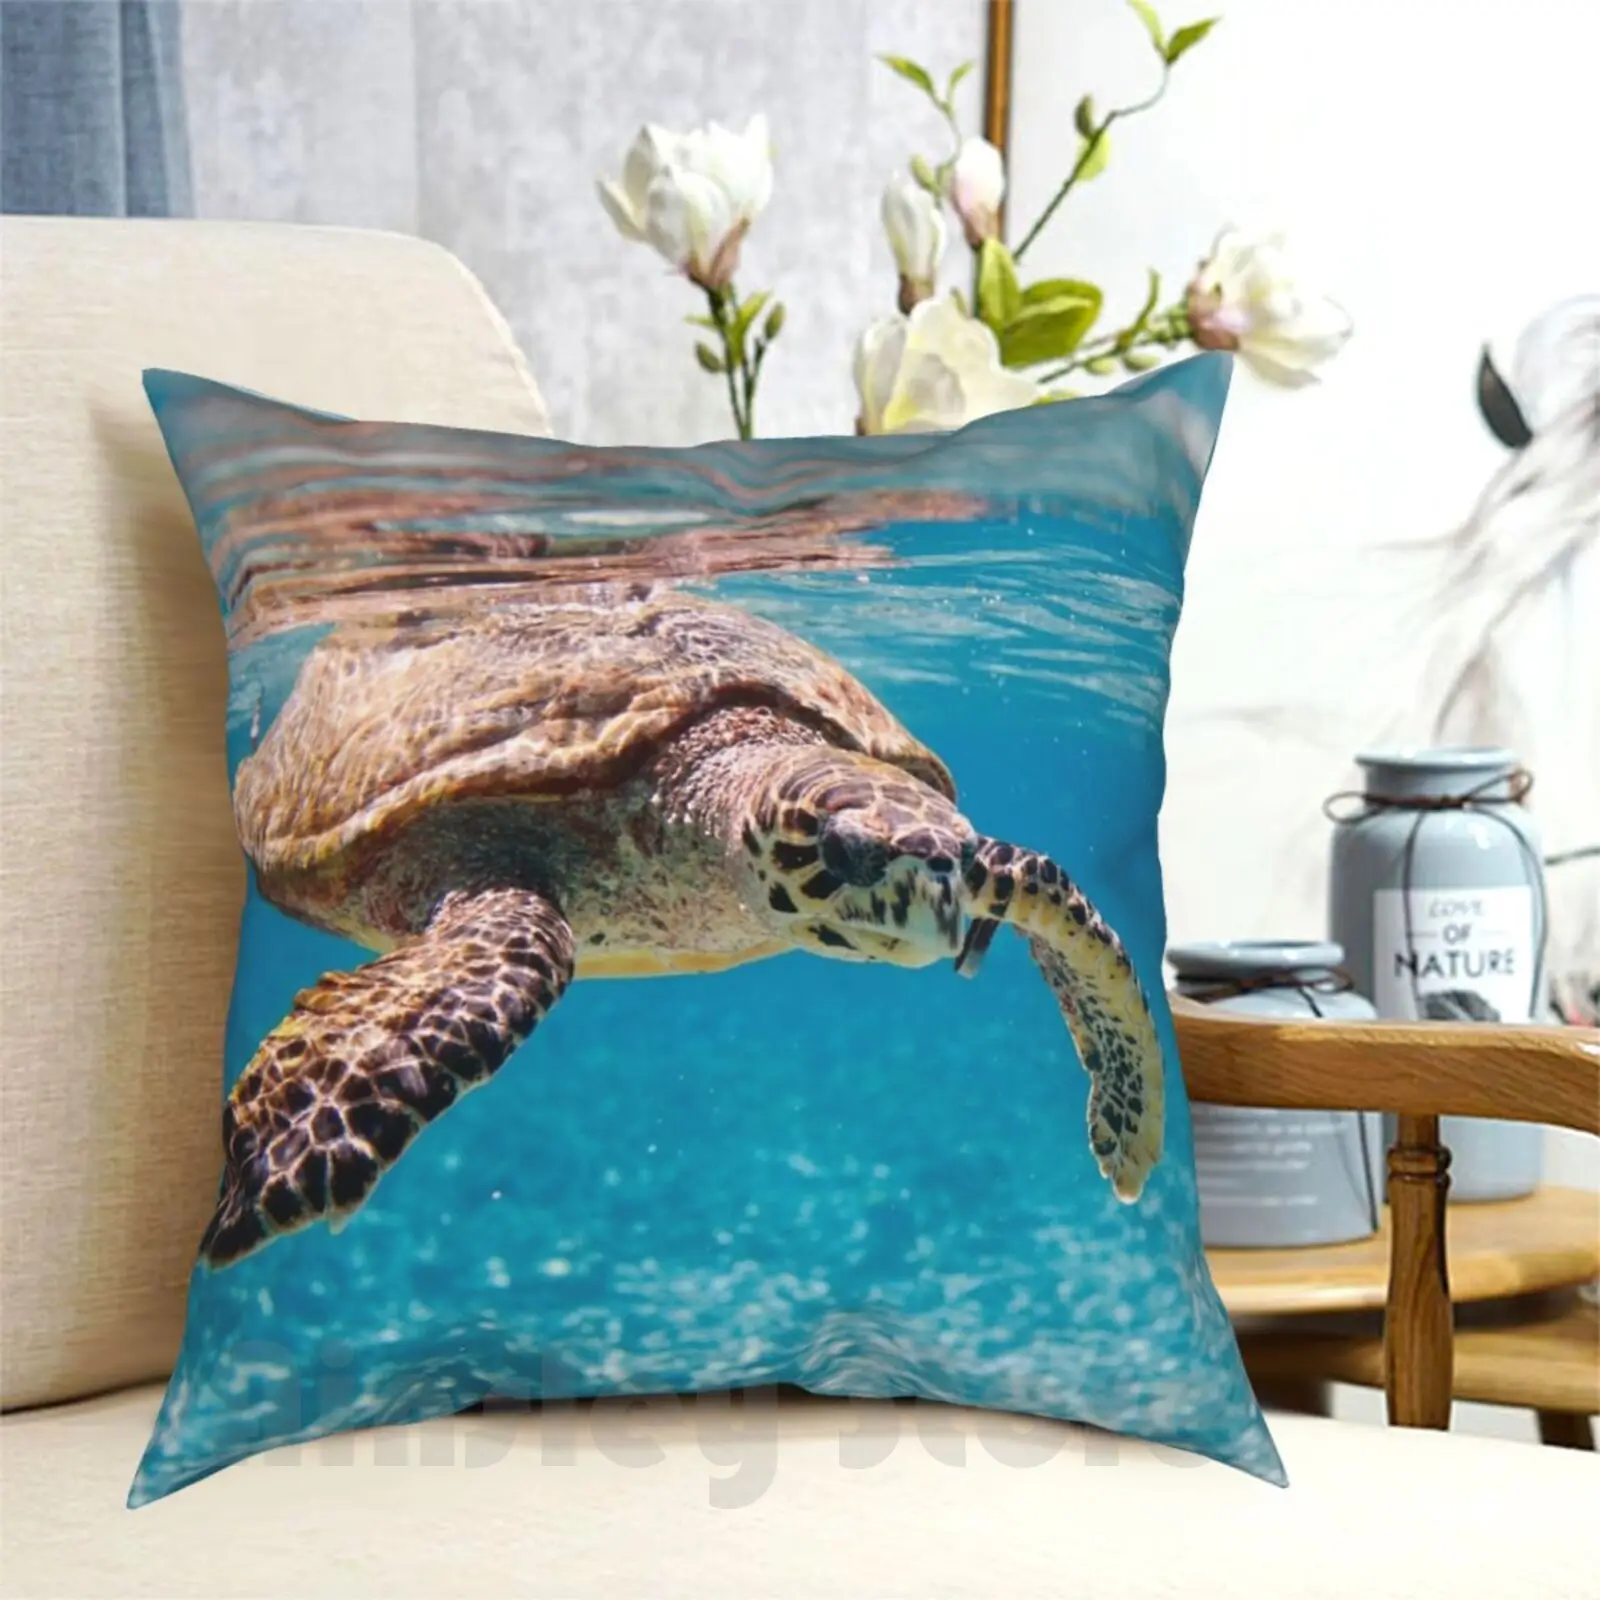 

Sea Turtle In The Ocean Pillow Case Printed Home Soft DIY Pillow cover Turtle Ocean Sea Sea Turtle Animal Nature Seafront